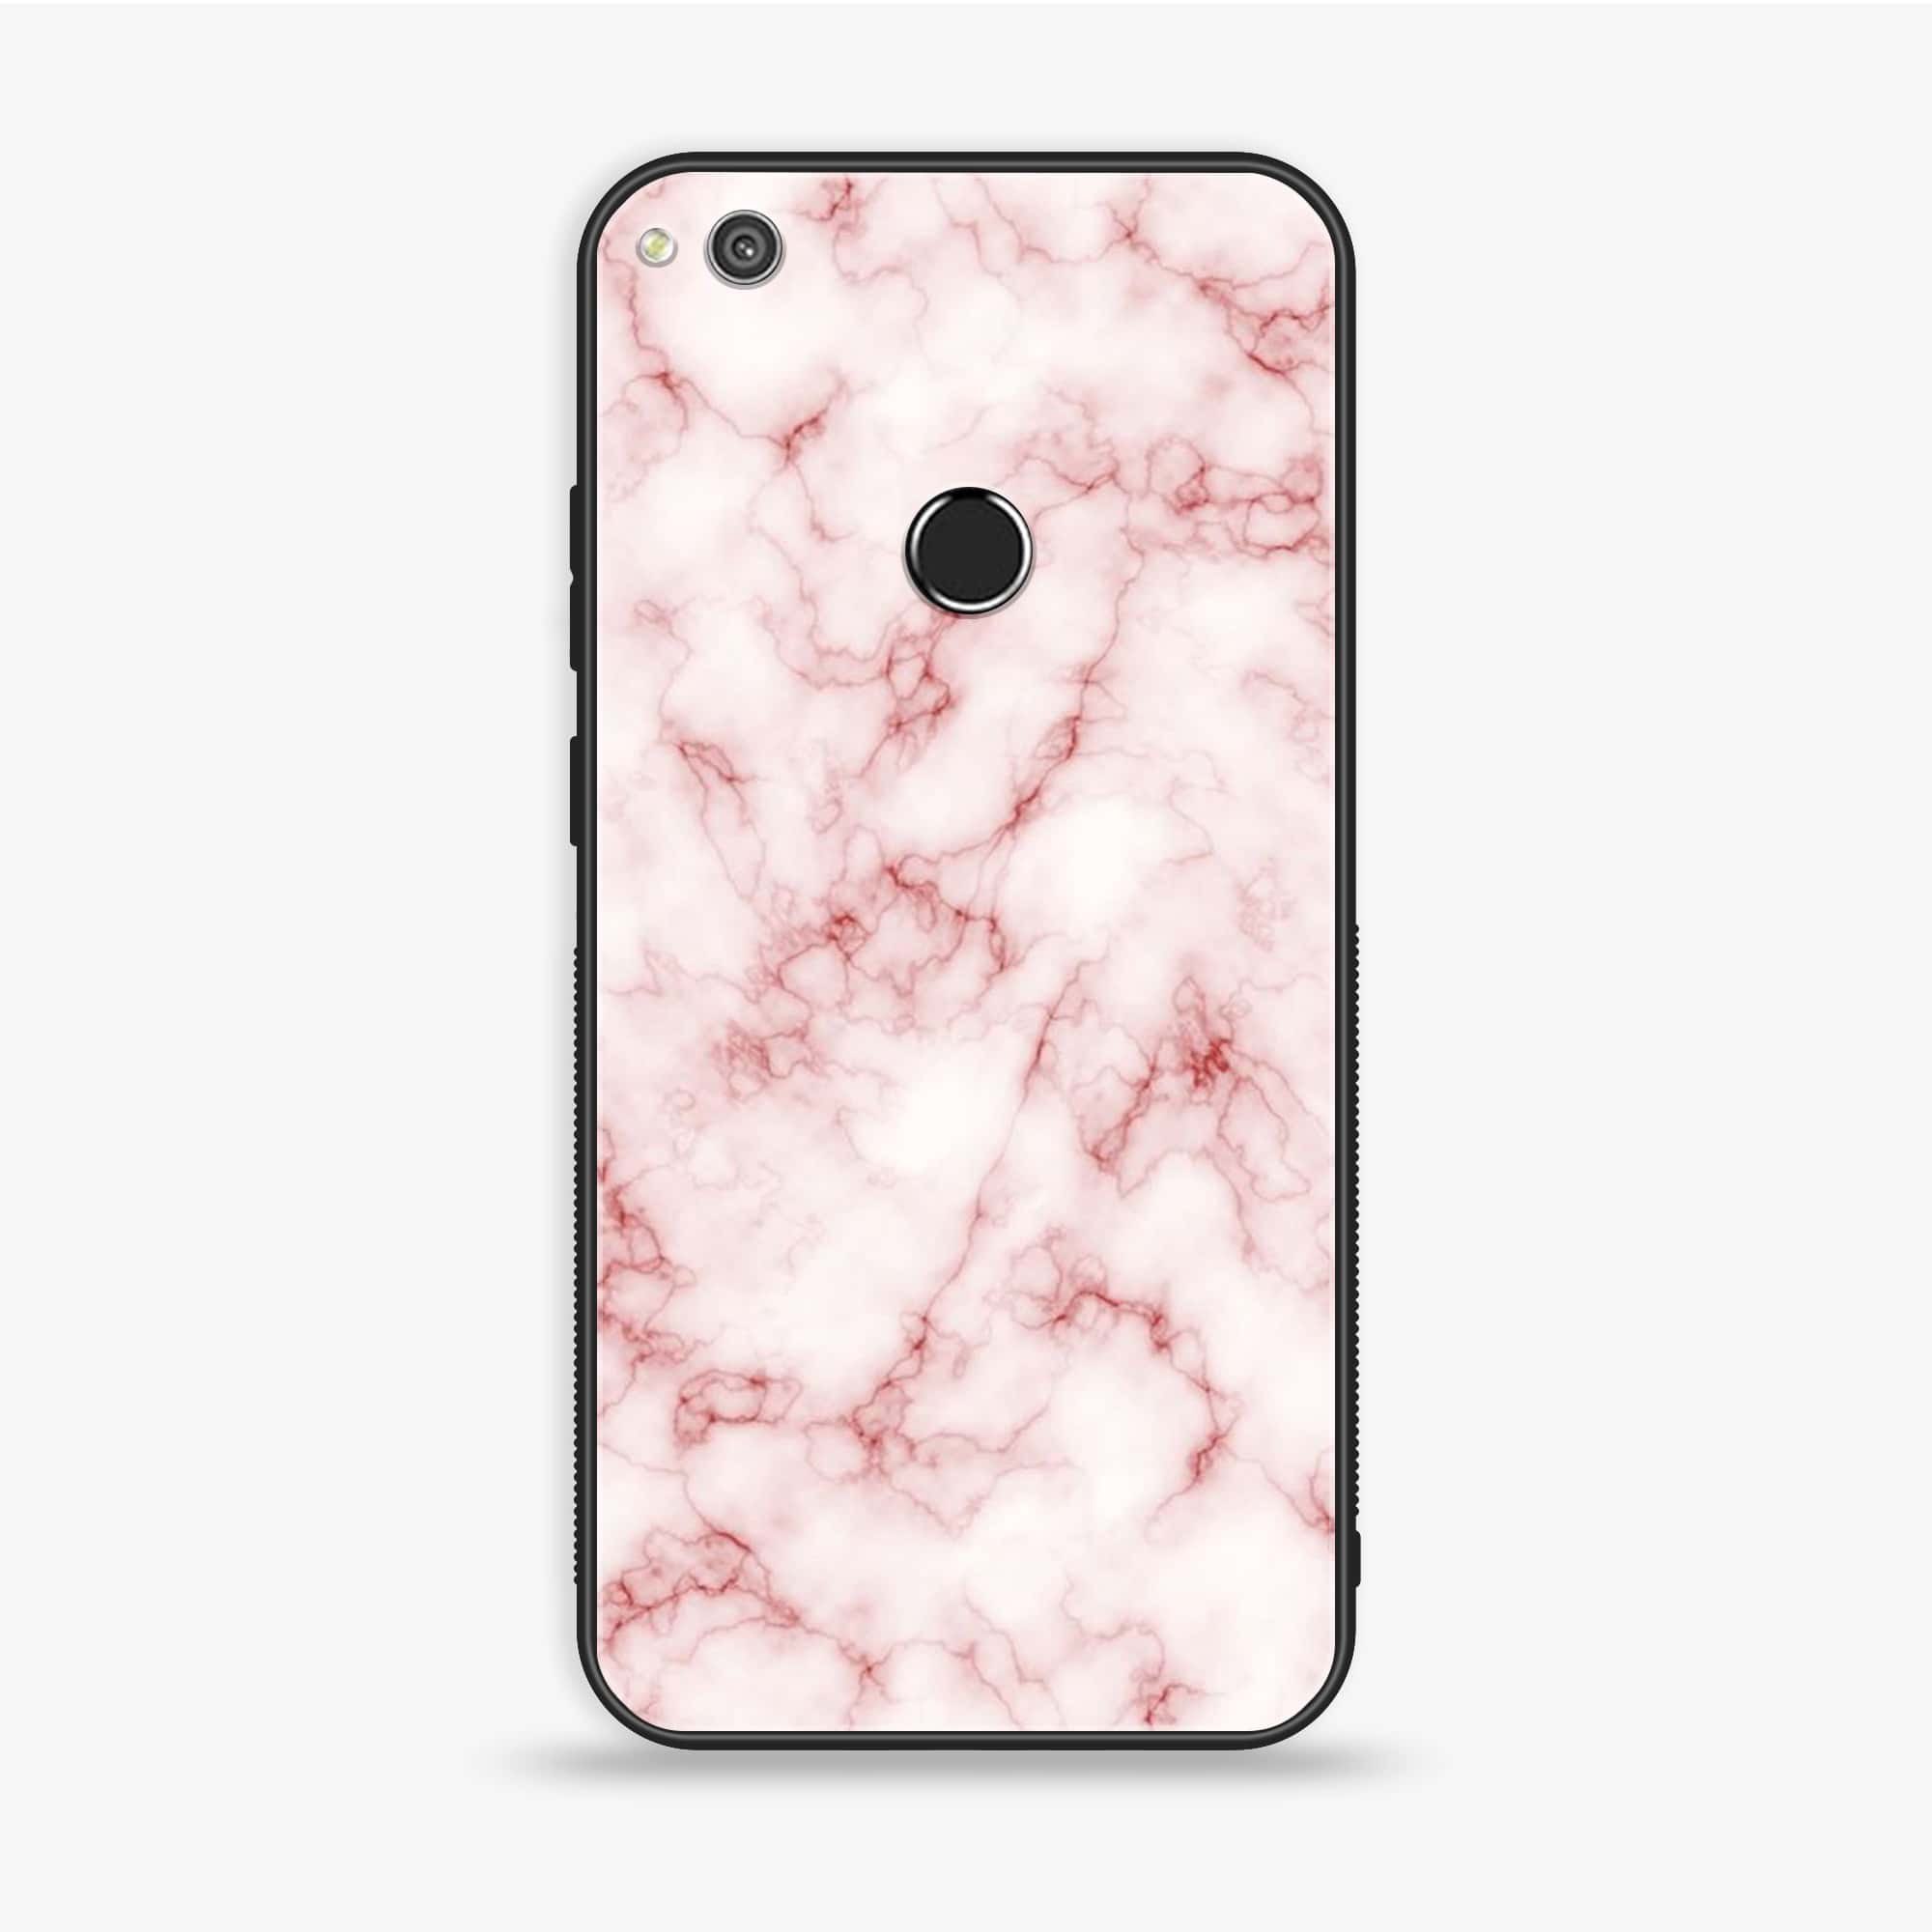 Honor 8 Lite - Pink Marble Series - Premium Printed Glass soft Bumper shock Proof Case